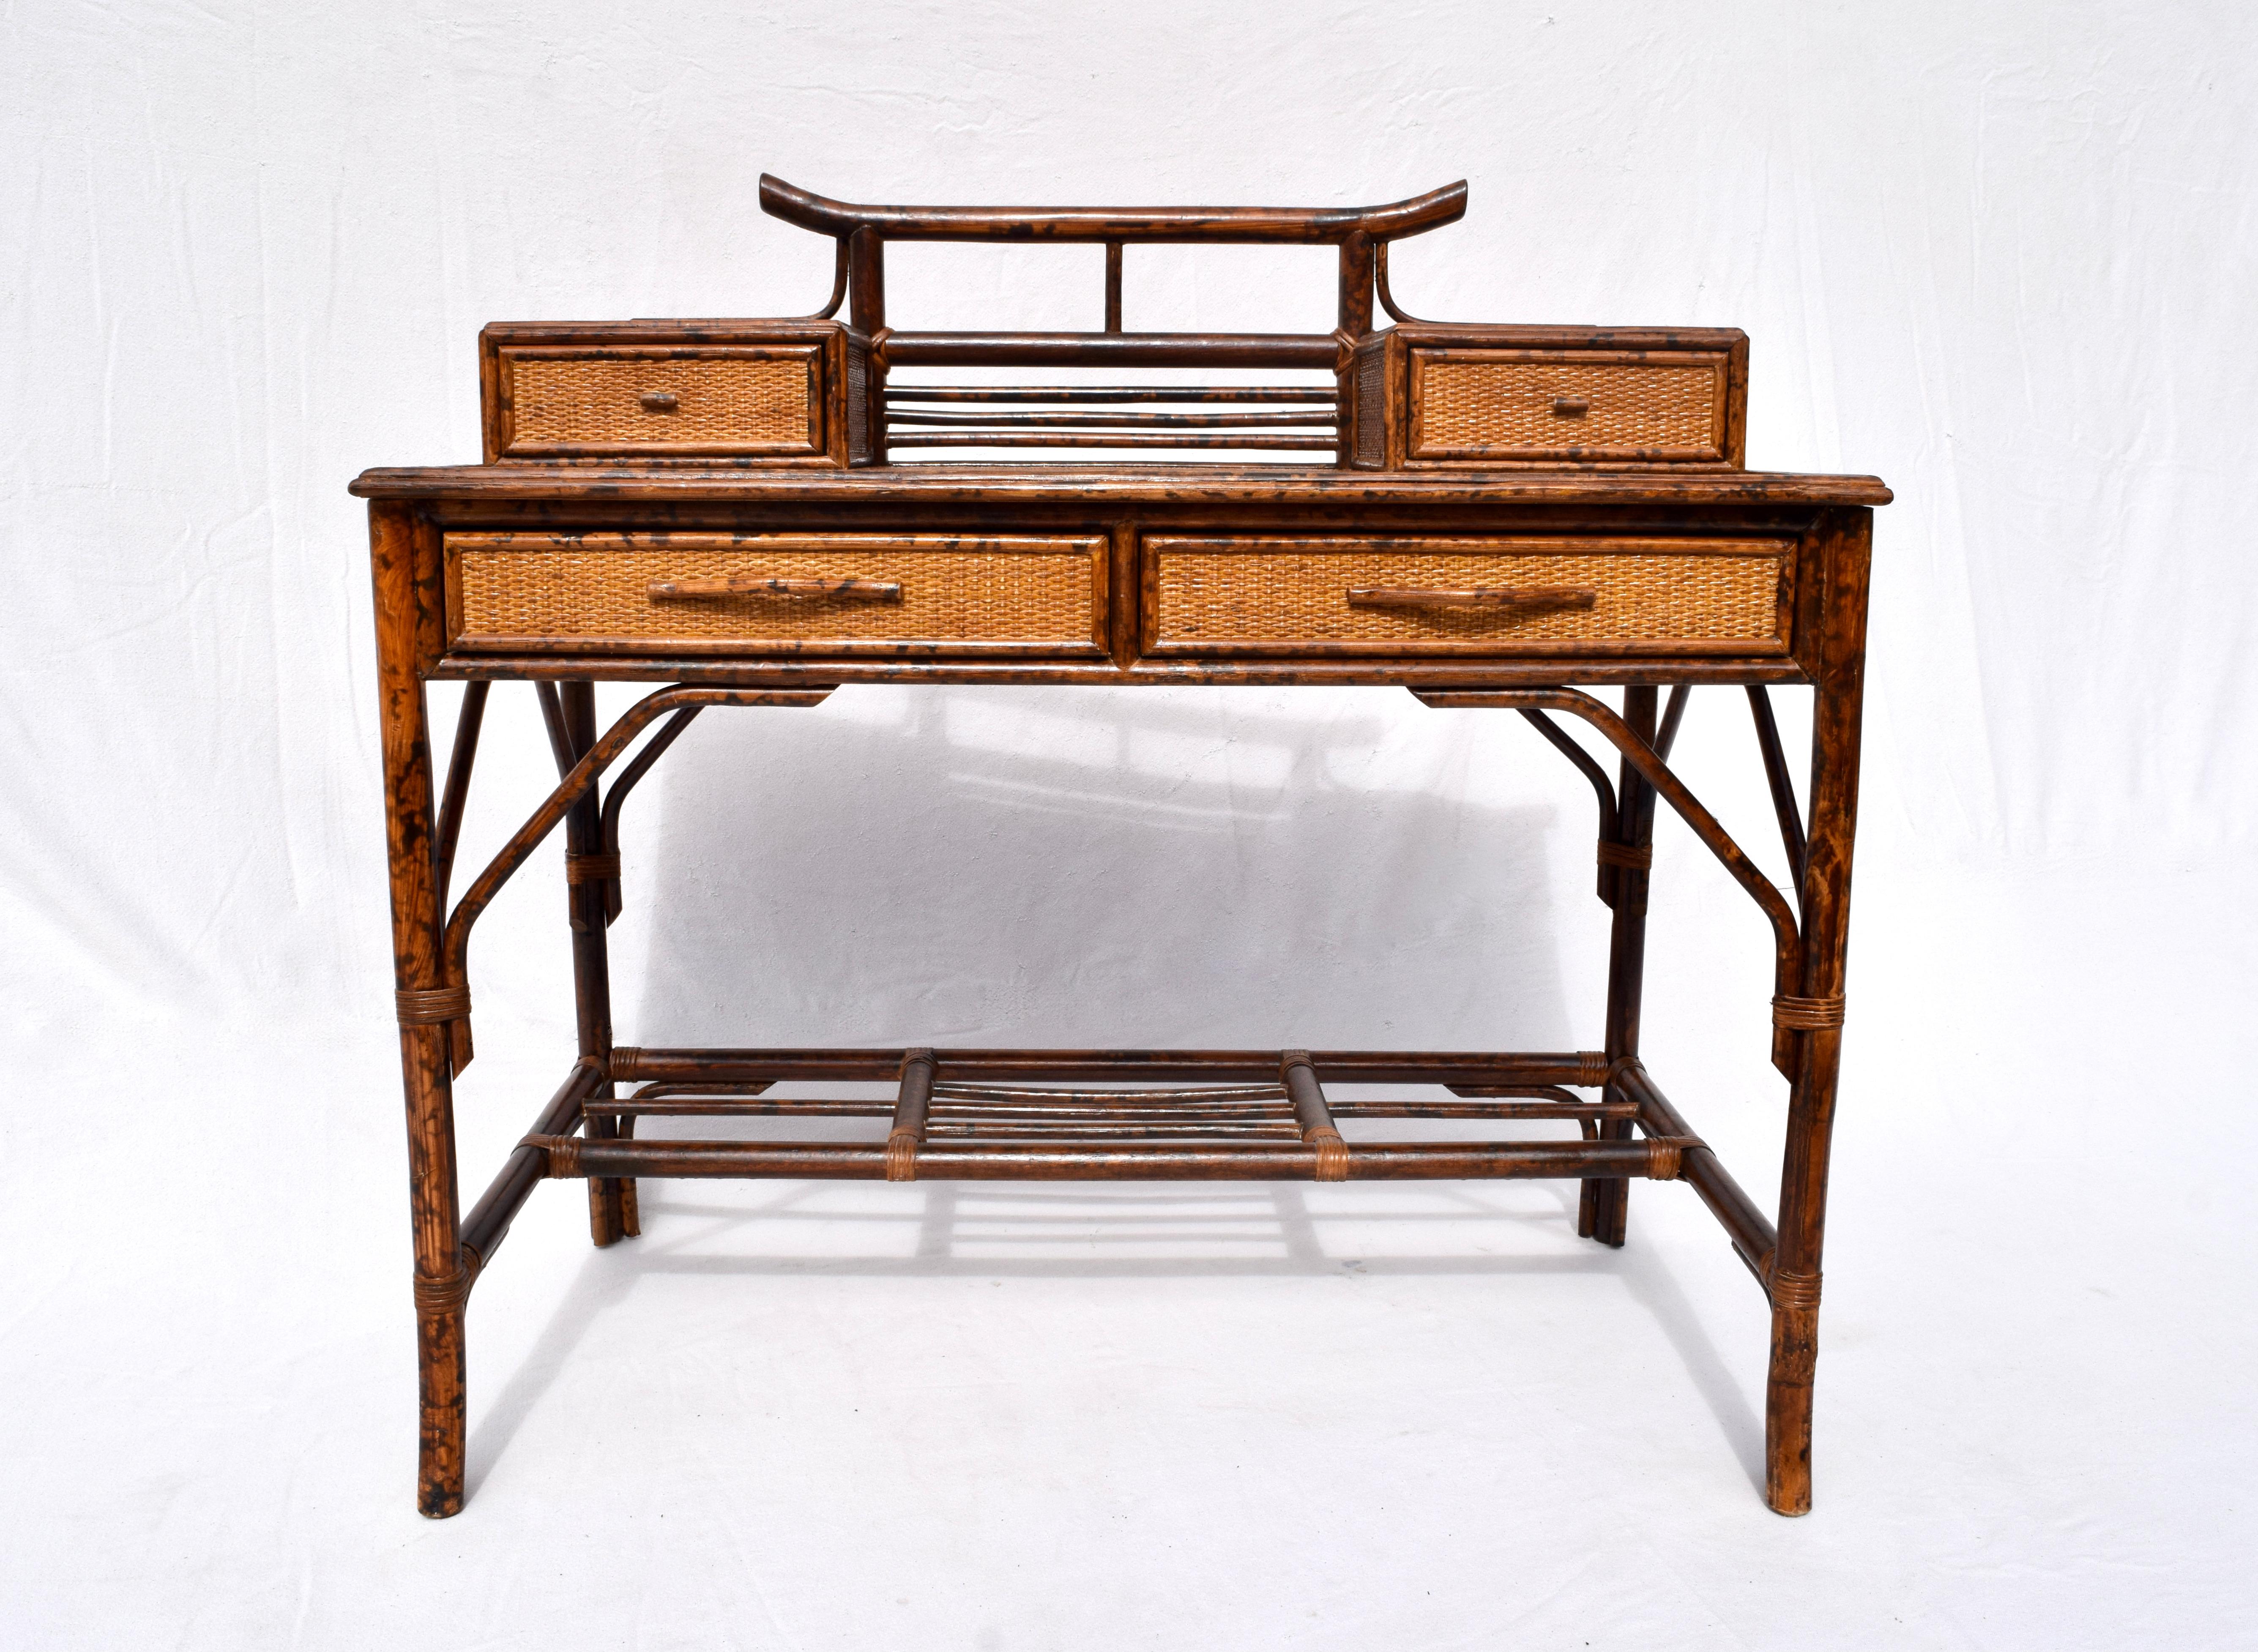 Midcentury faux tortoise bamboo and grass cloth desk with Asian modern form featuring two glove boxes, two drawers, elegant legs with support brackets and matching caned seat chair. Includes new custom Cowtan and Tout Chinoiserie toile upholstered